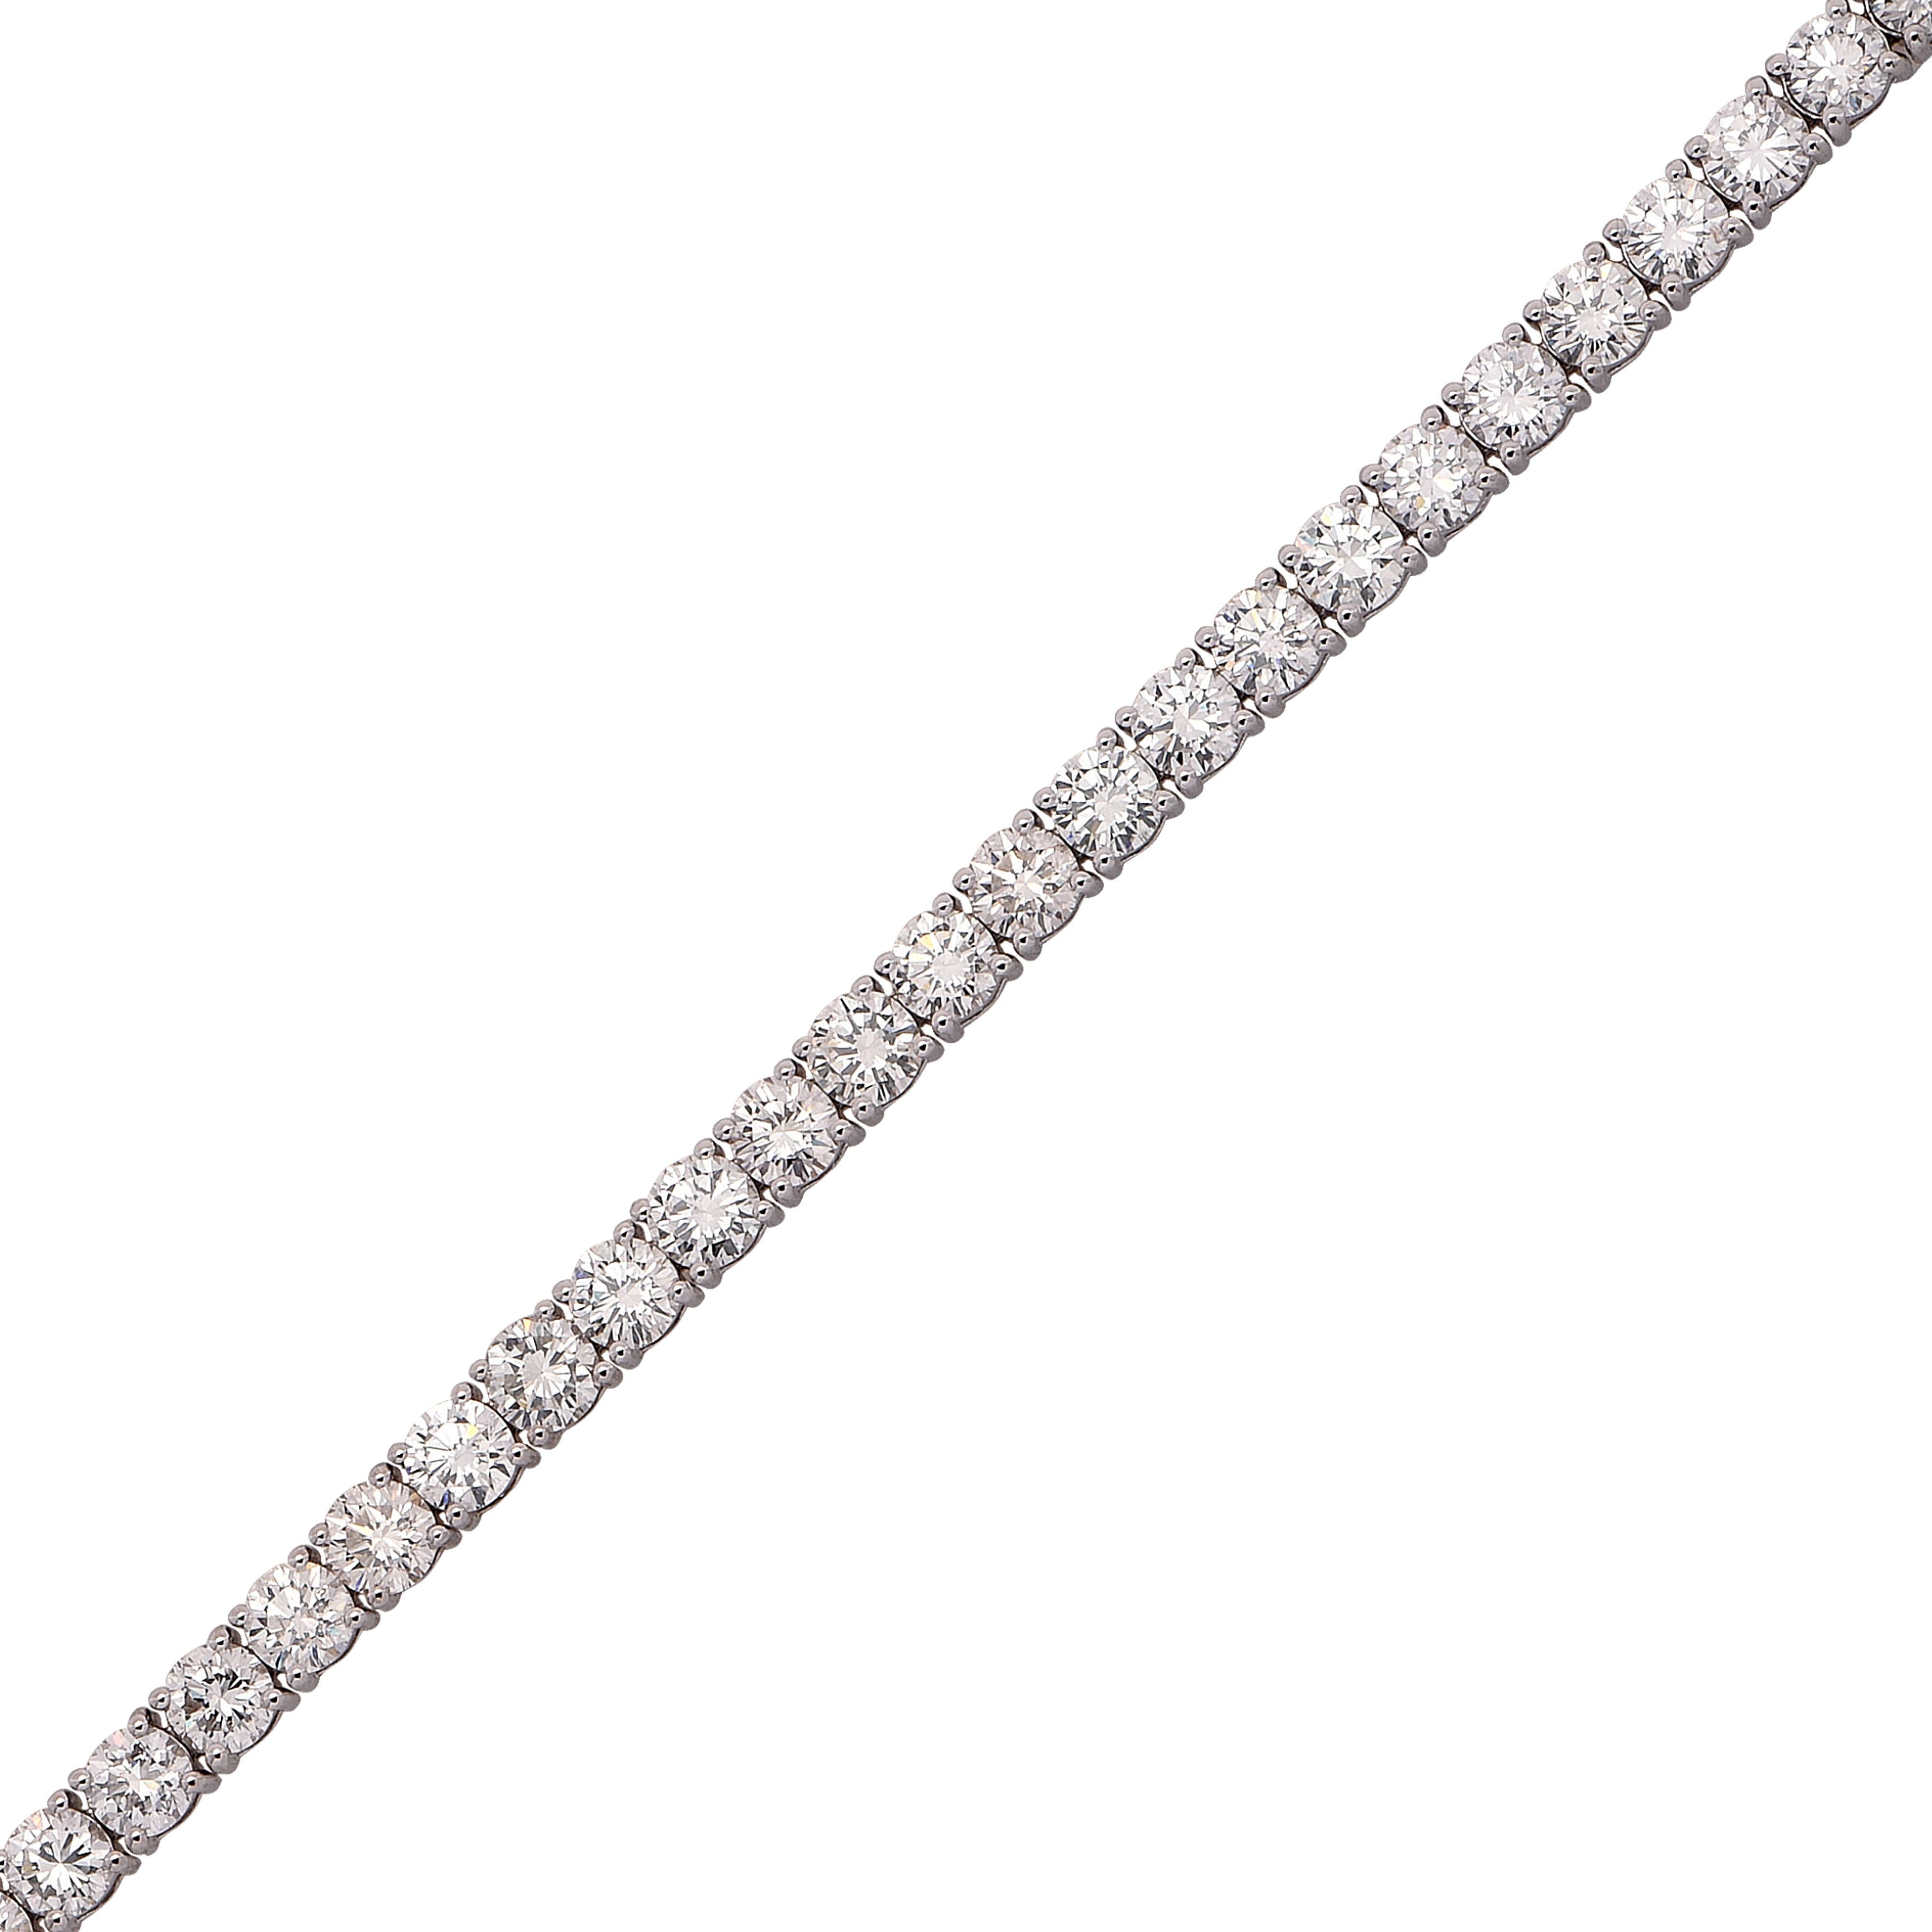 Exquisite diamond tennis bracelet crafted in white gold, showcasing 38 stunning round brilliant cut diamonds weighing approximately 13.04 carats total, G color, SI1 clarity, set in a seamless eternity of diamonds, creating a spectacular symphony of